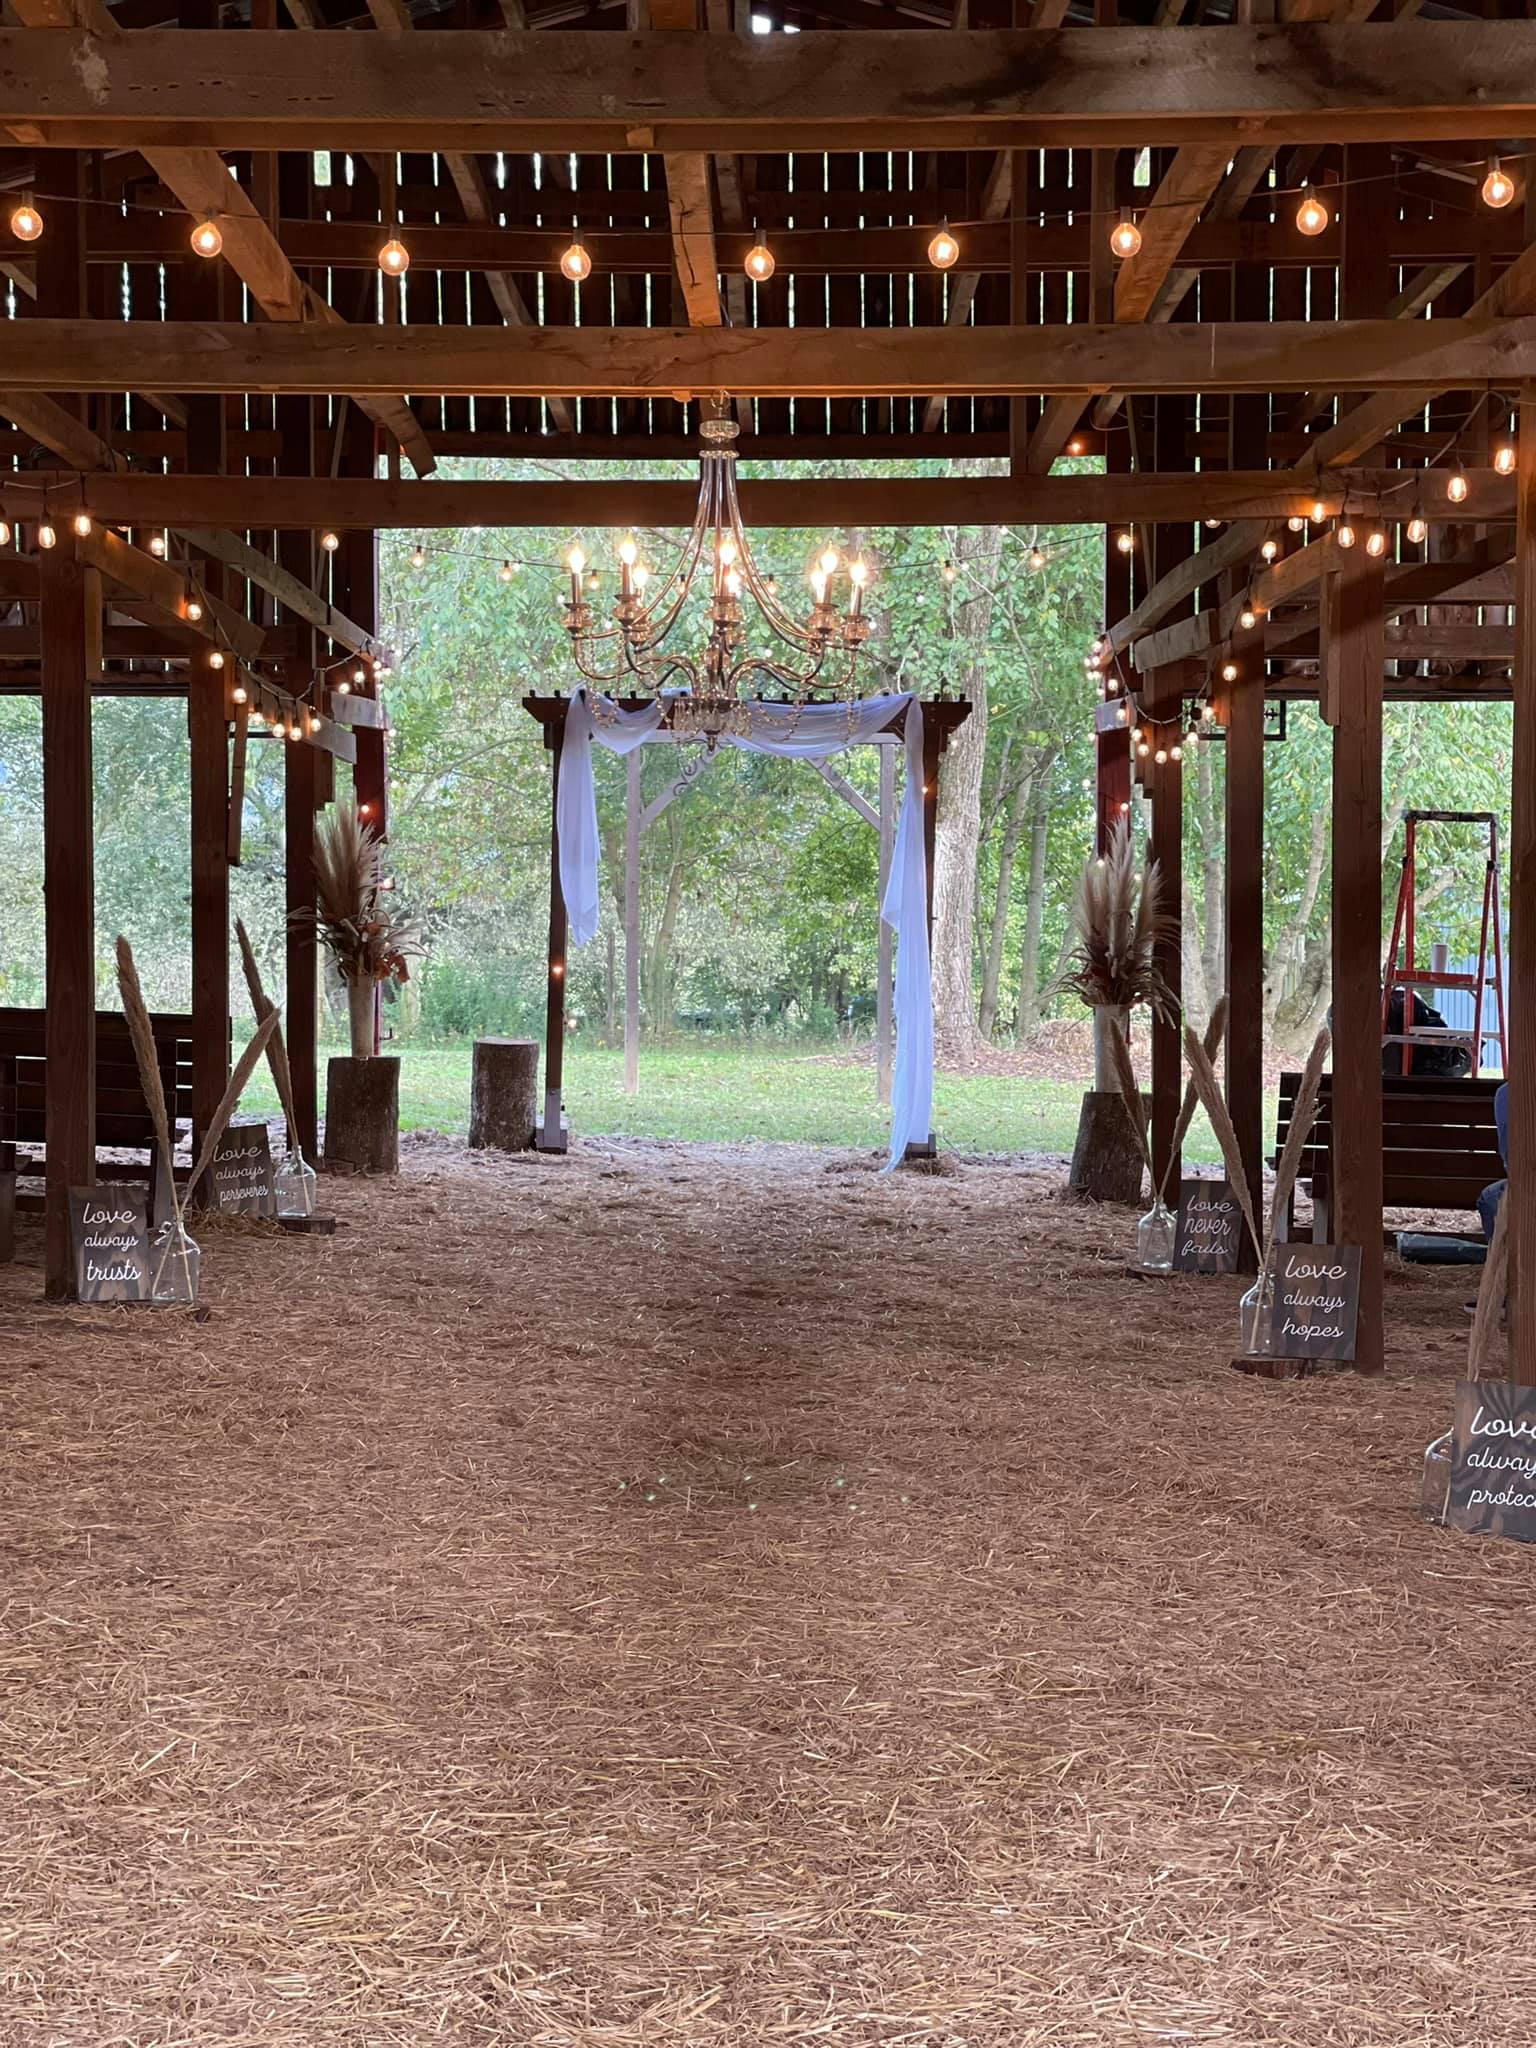 Photo of chandelier and accent lighting in the barn with decorations at the end of each seating row including a hand lettered sign that describes Love. the alter area is trimmed with white bunting. The back of the barn is open to the outside greenspace